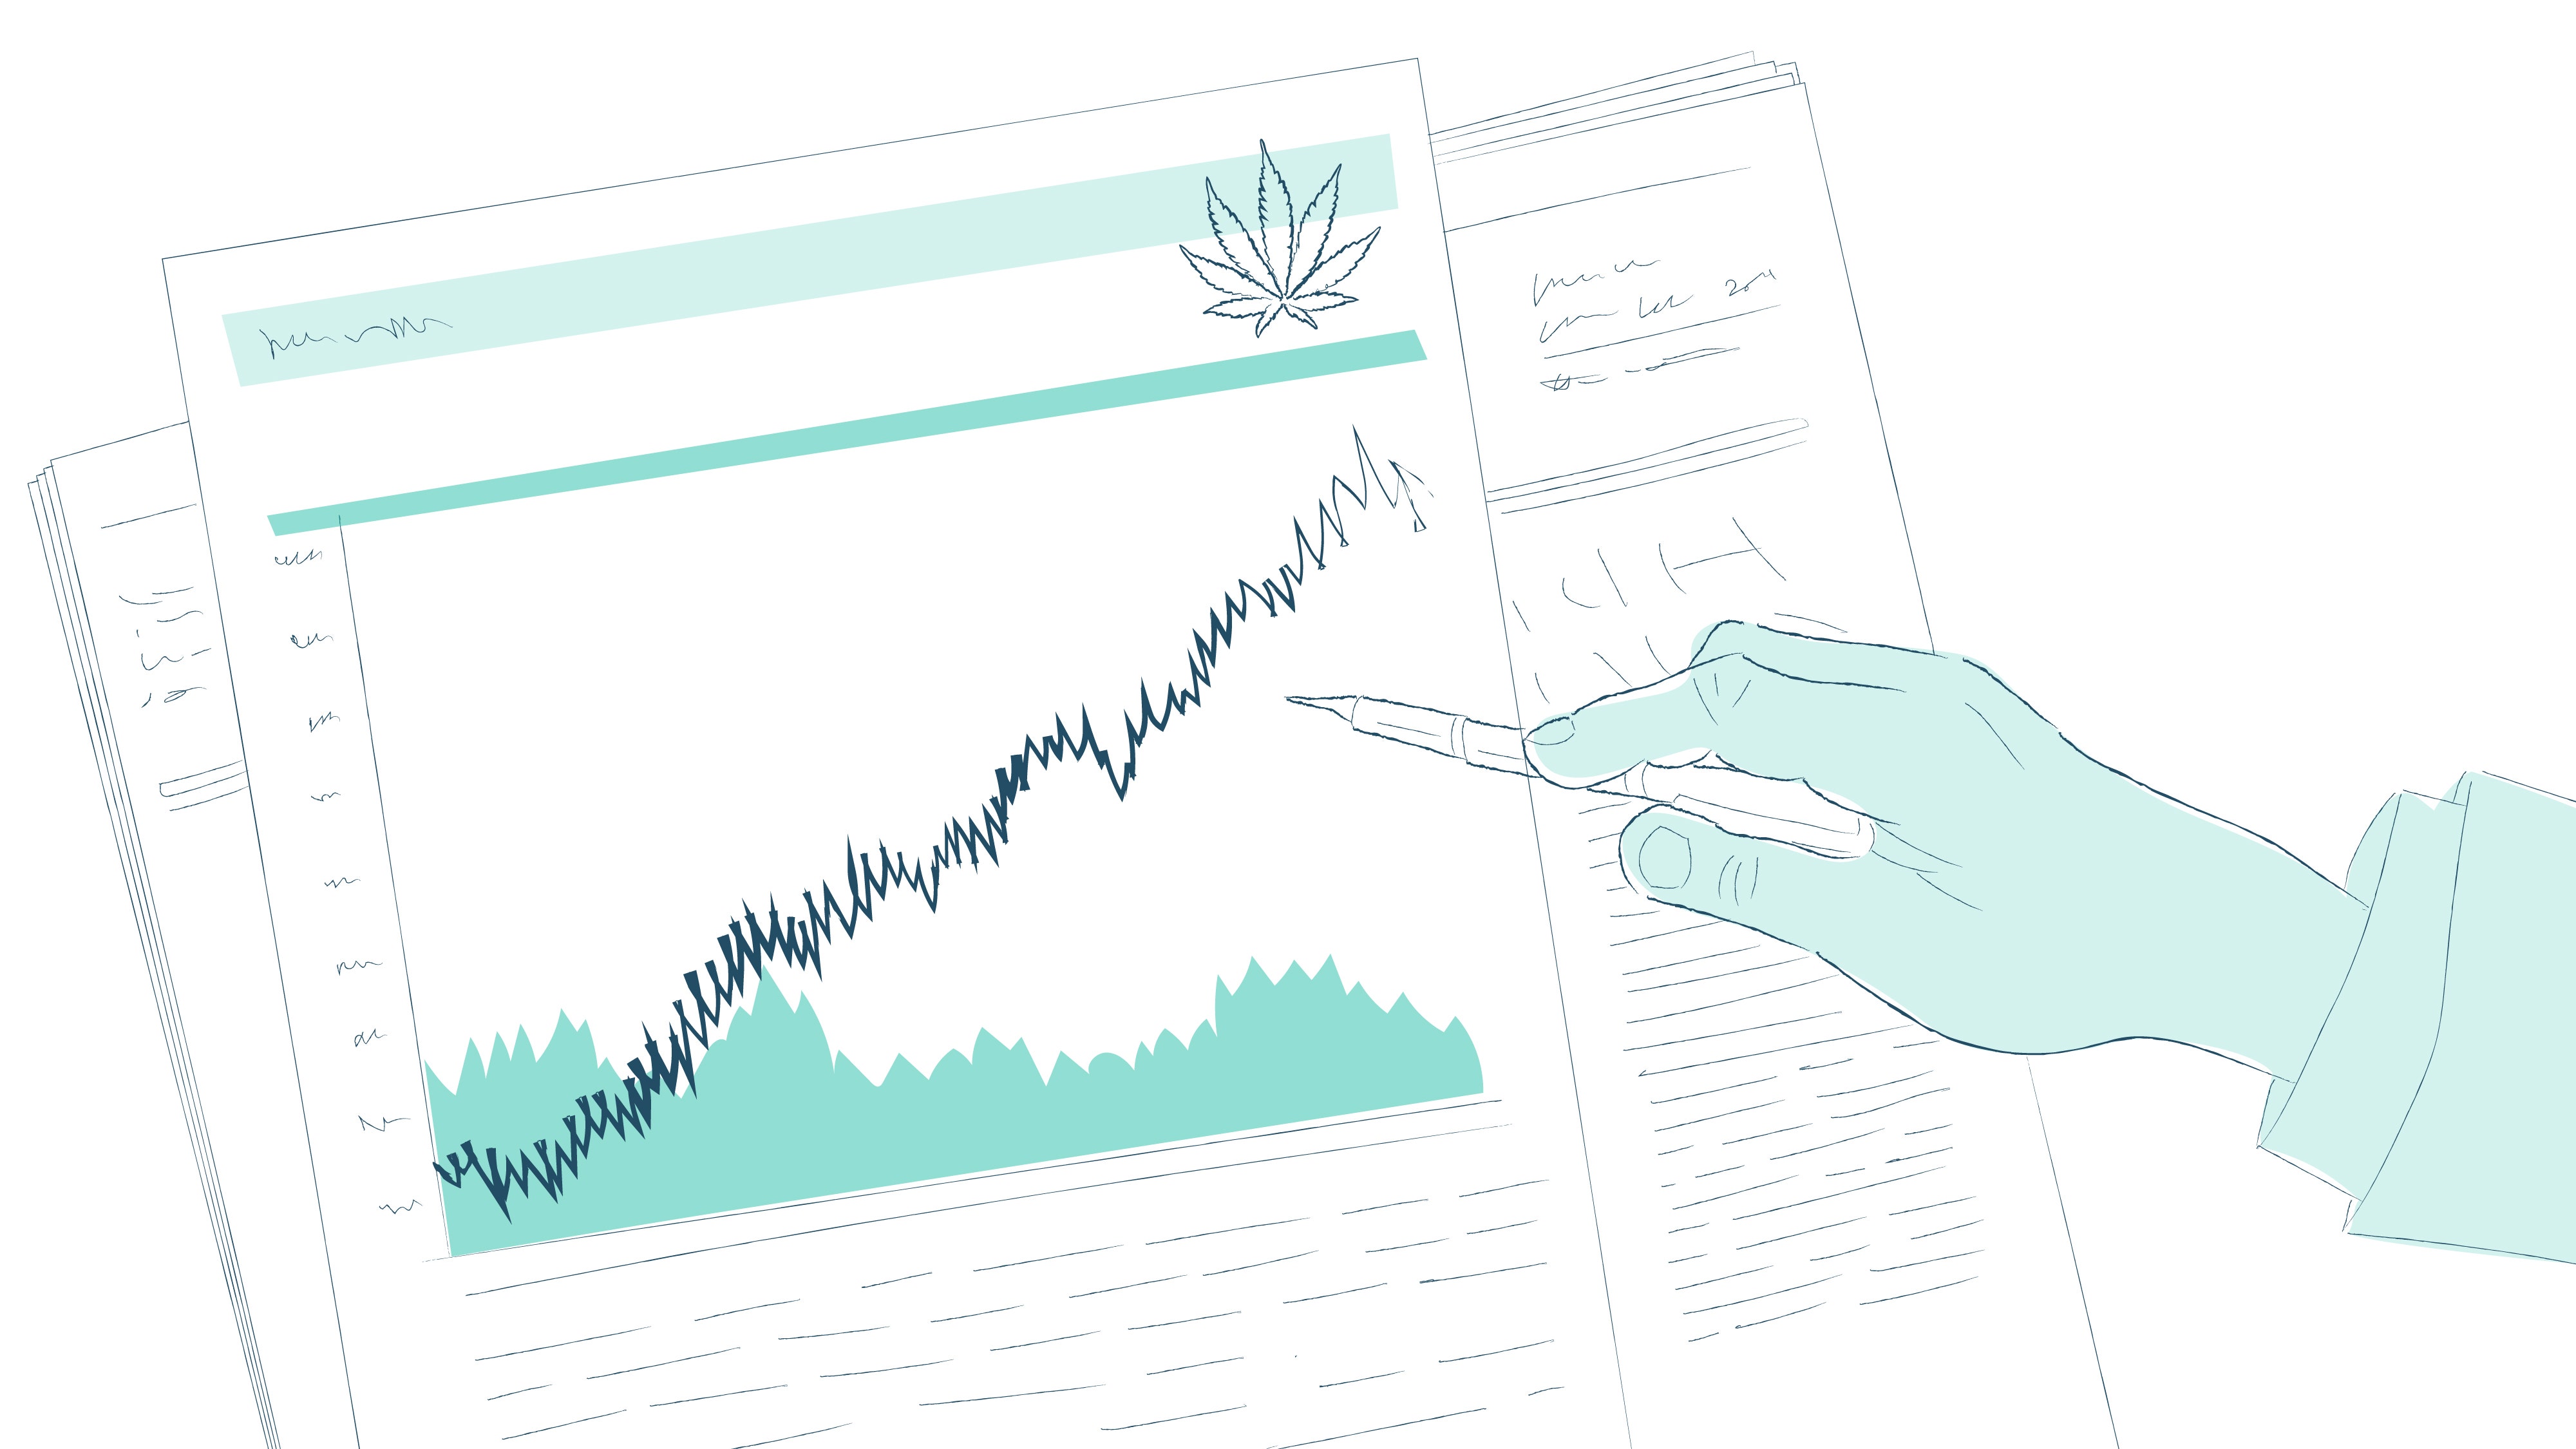 Urban-gro, Khiron Life Sciences & CURE Pharmaceutical Among Top Cannabis Stock Movers On July 1, 2021